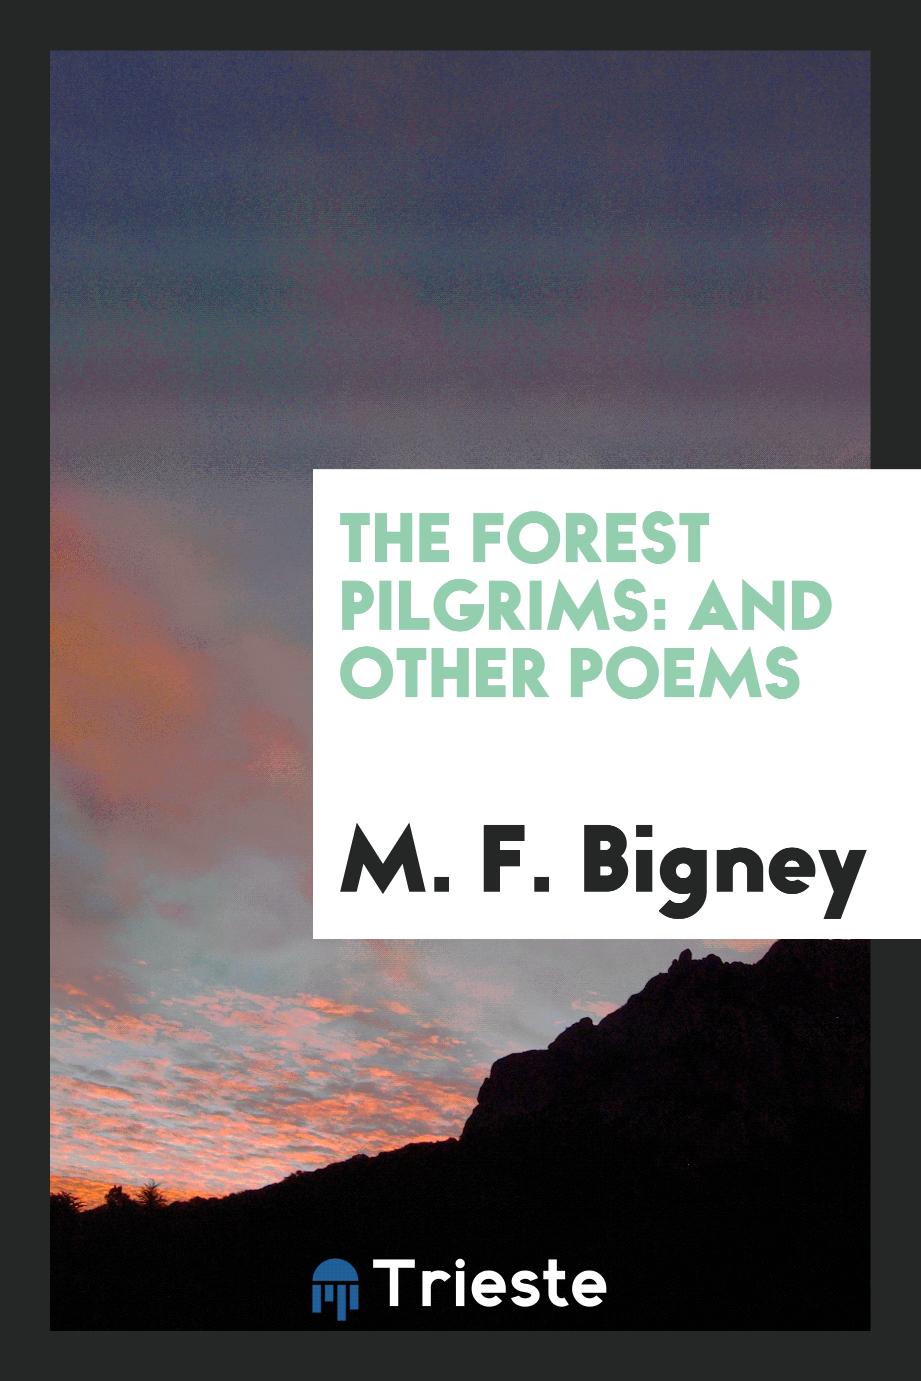 The forest pilgrims: and other poems